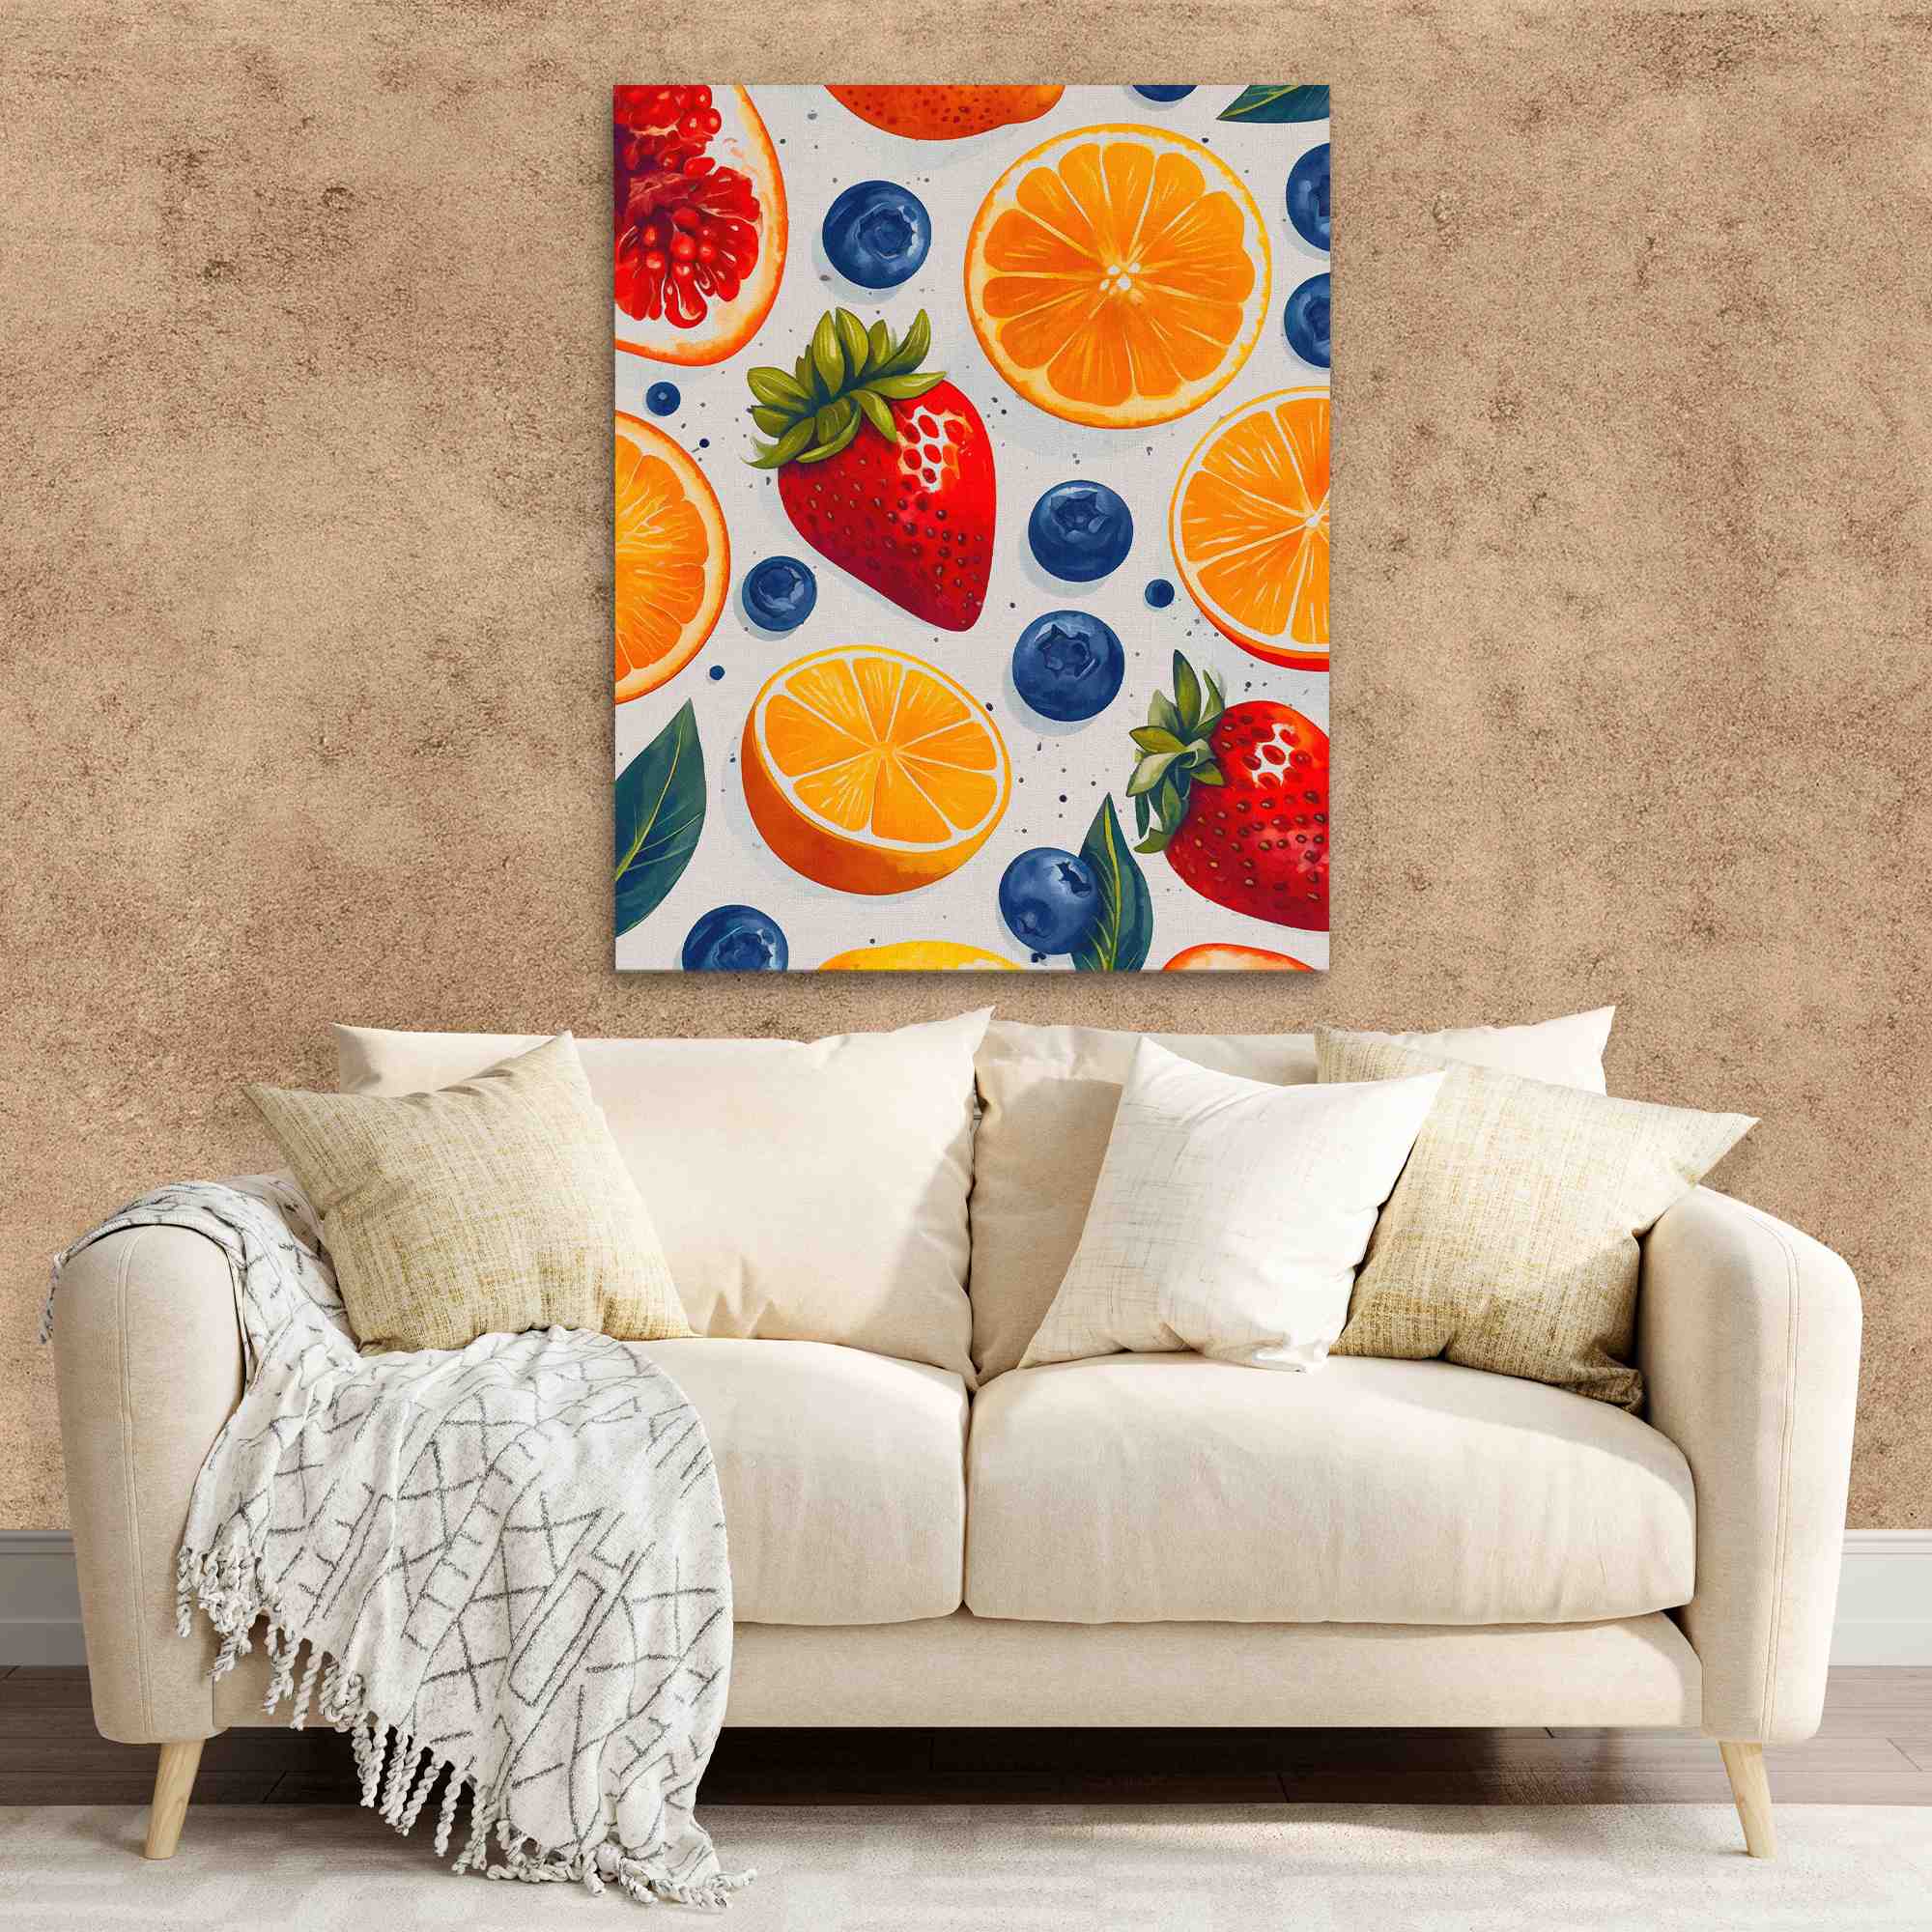 a painting of oranges, strawberries, and blueberries on a white background